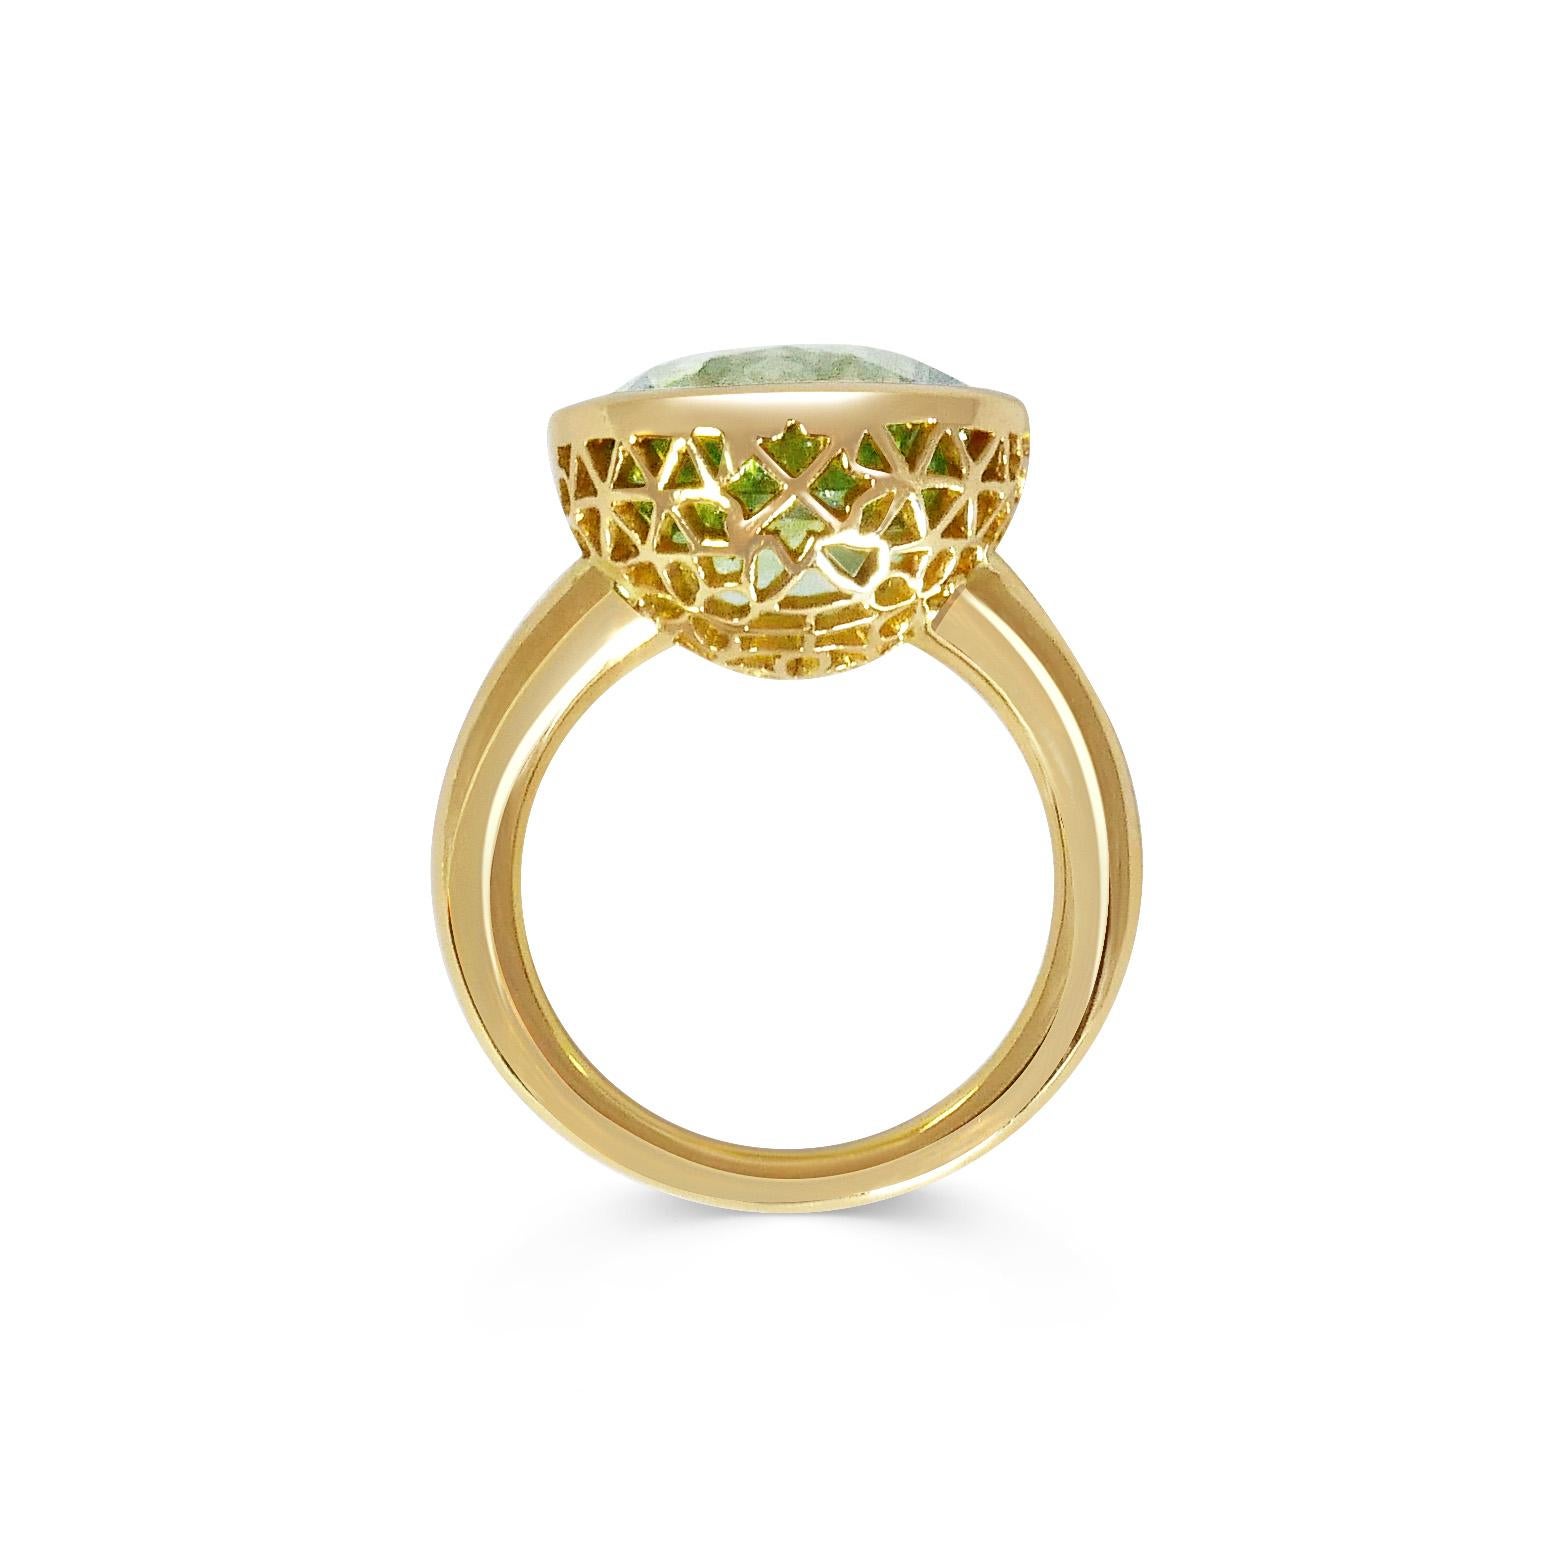 Handcrafted Oval Cut 9,75 Carats Green Tourmaline 18 Karat Yellow Gold Cocktail Ring . Our expert craftsmen hand pierce our iconic gold lace to fit each stone on a tapered band making each ring One of a Kind. This unique technique, inspired by our